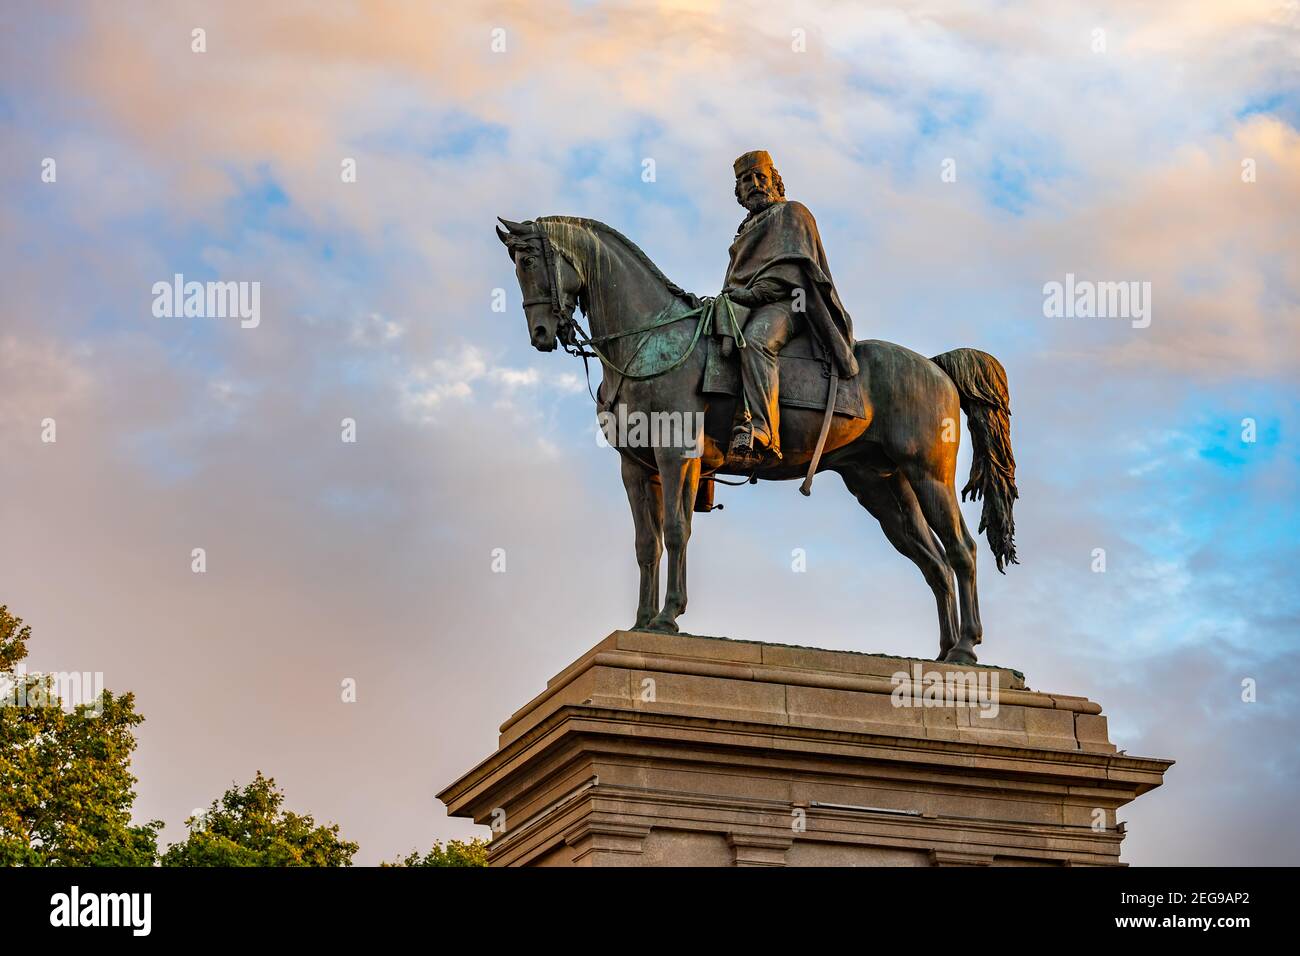 Monument to Giuseppe Garibaldi, equestrian statue (1895) by Emilio Gallori at sunset on Janiculum Hill, Rome, Italy Stock Photo